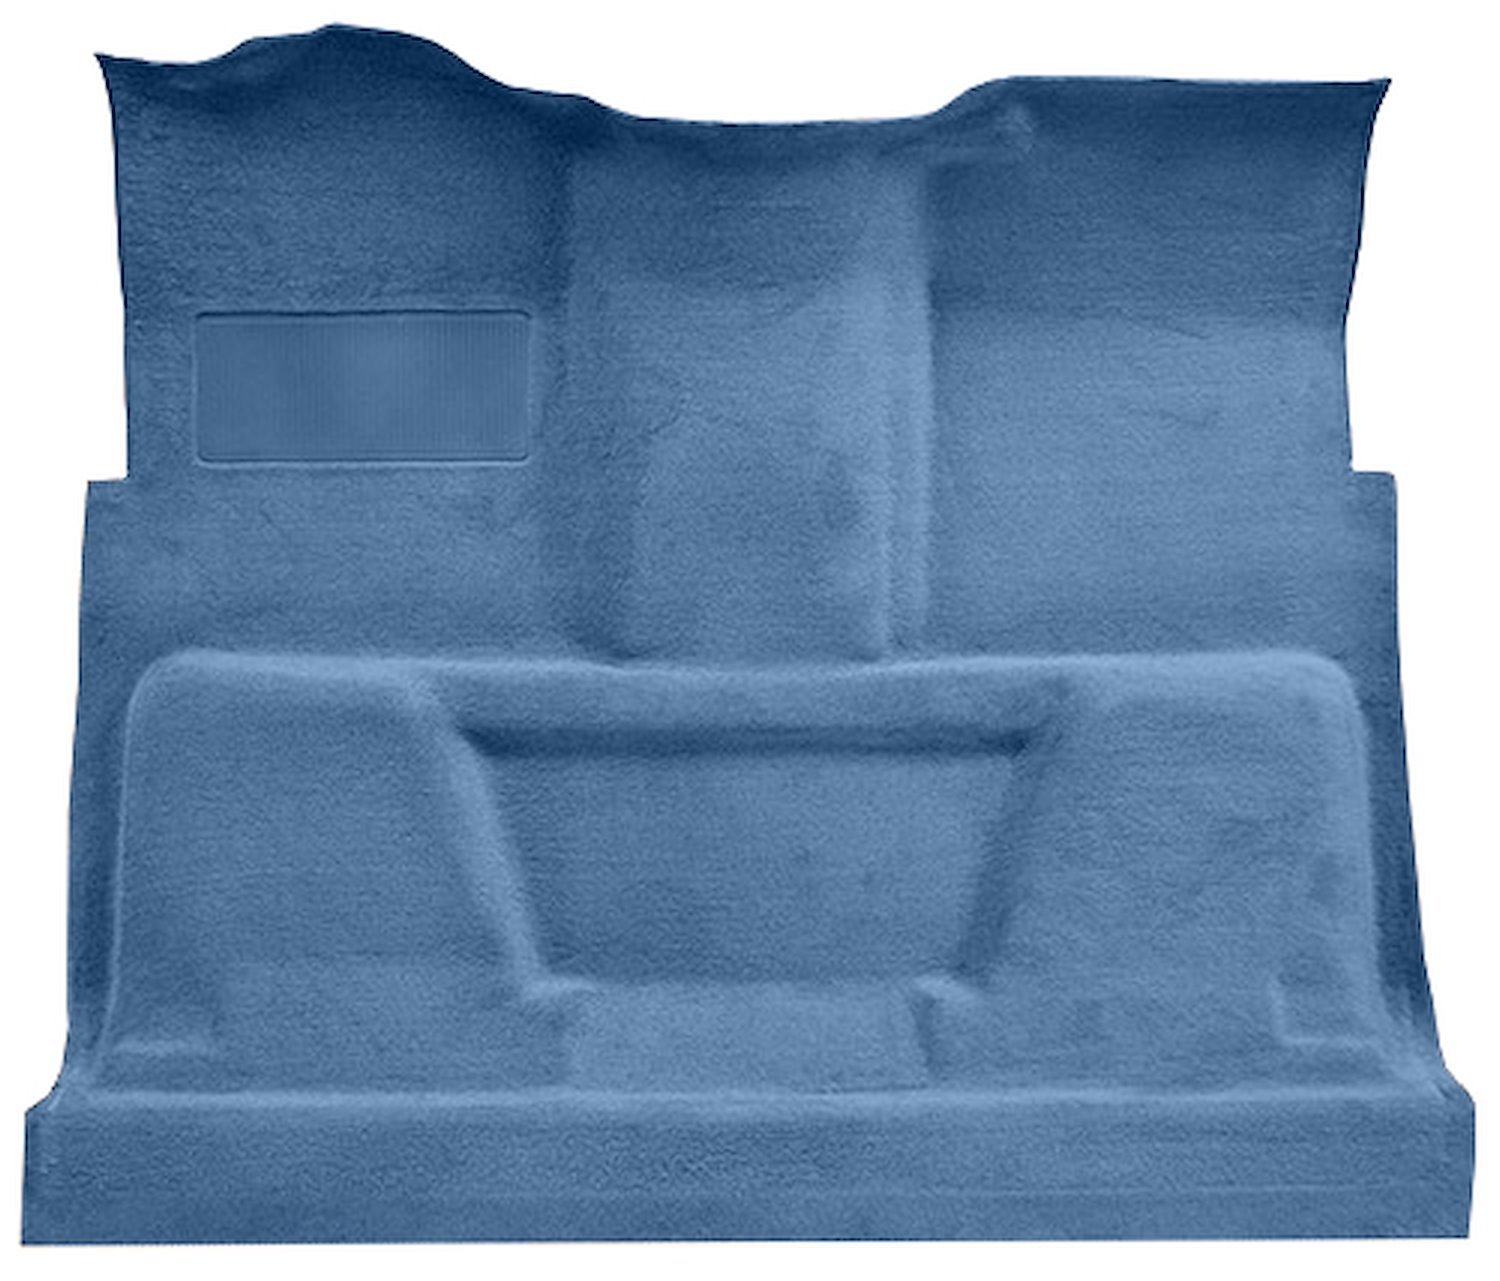 Molded Cut Pile Carpet for 1975-1980 GM C Series Regular Cab Trucks w/TH350 or 3-Speed Manual [Mass Backing, Blue]